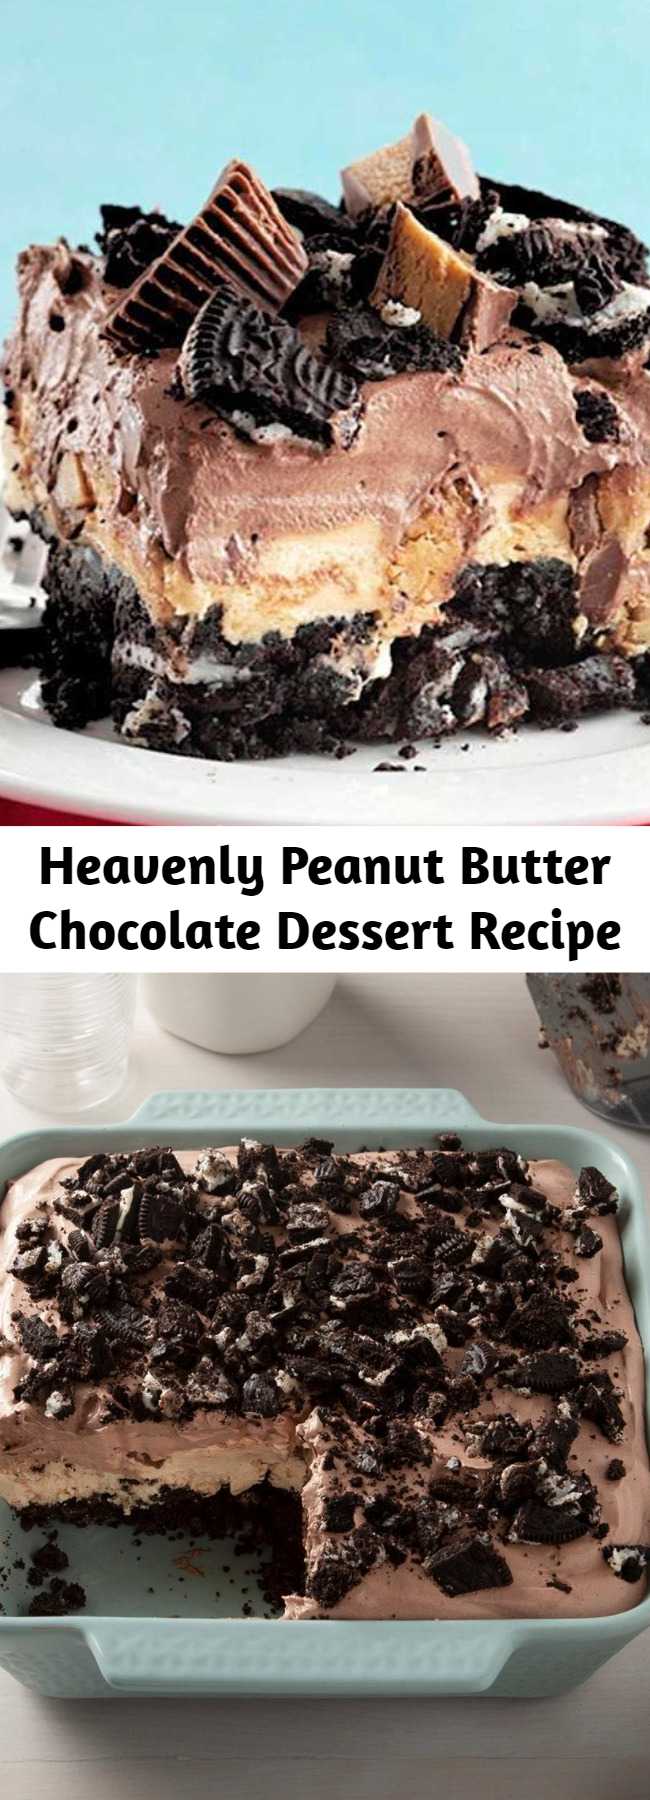 Heavenly Peanut Butter Chocolate Dessert Recipe - The desserts of my dreams have both chocolate and peanut butter. So, when I came up with this rich chocolate and peanut butter dessert, it quickly became my all-time favorite. It's a cinch to whip together because it doesn't require any baking.